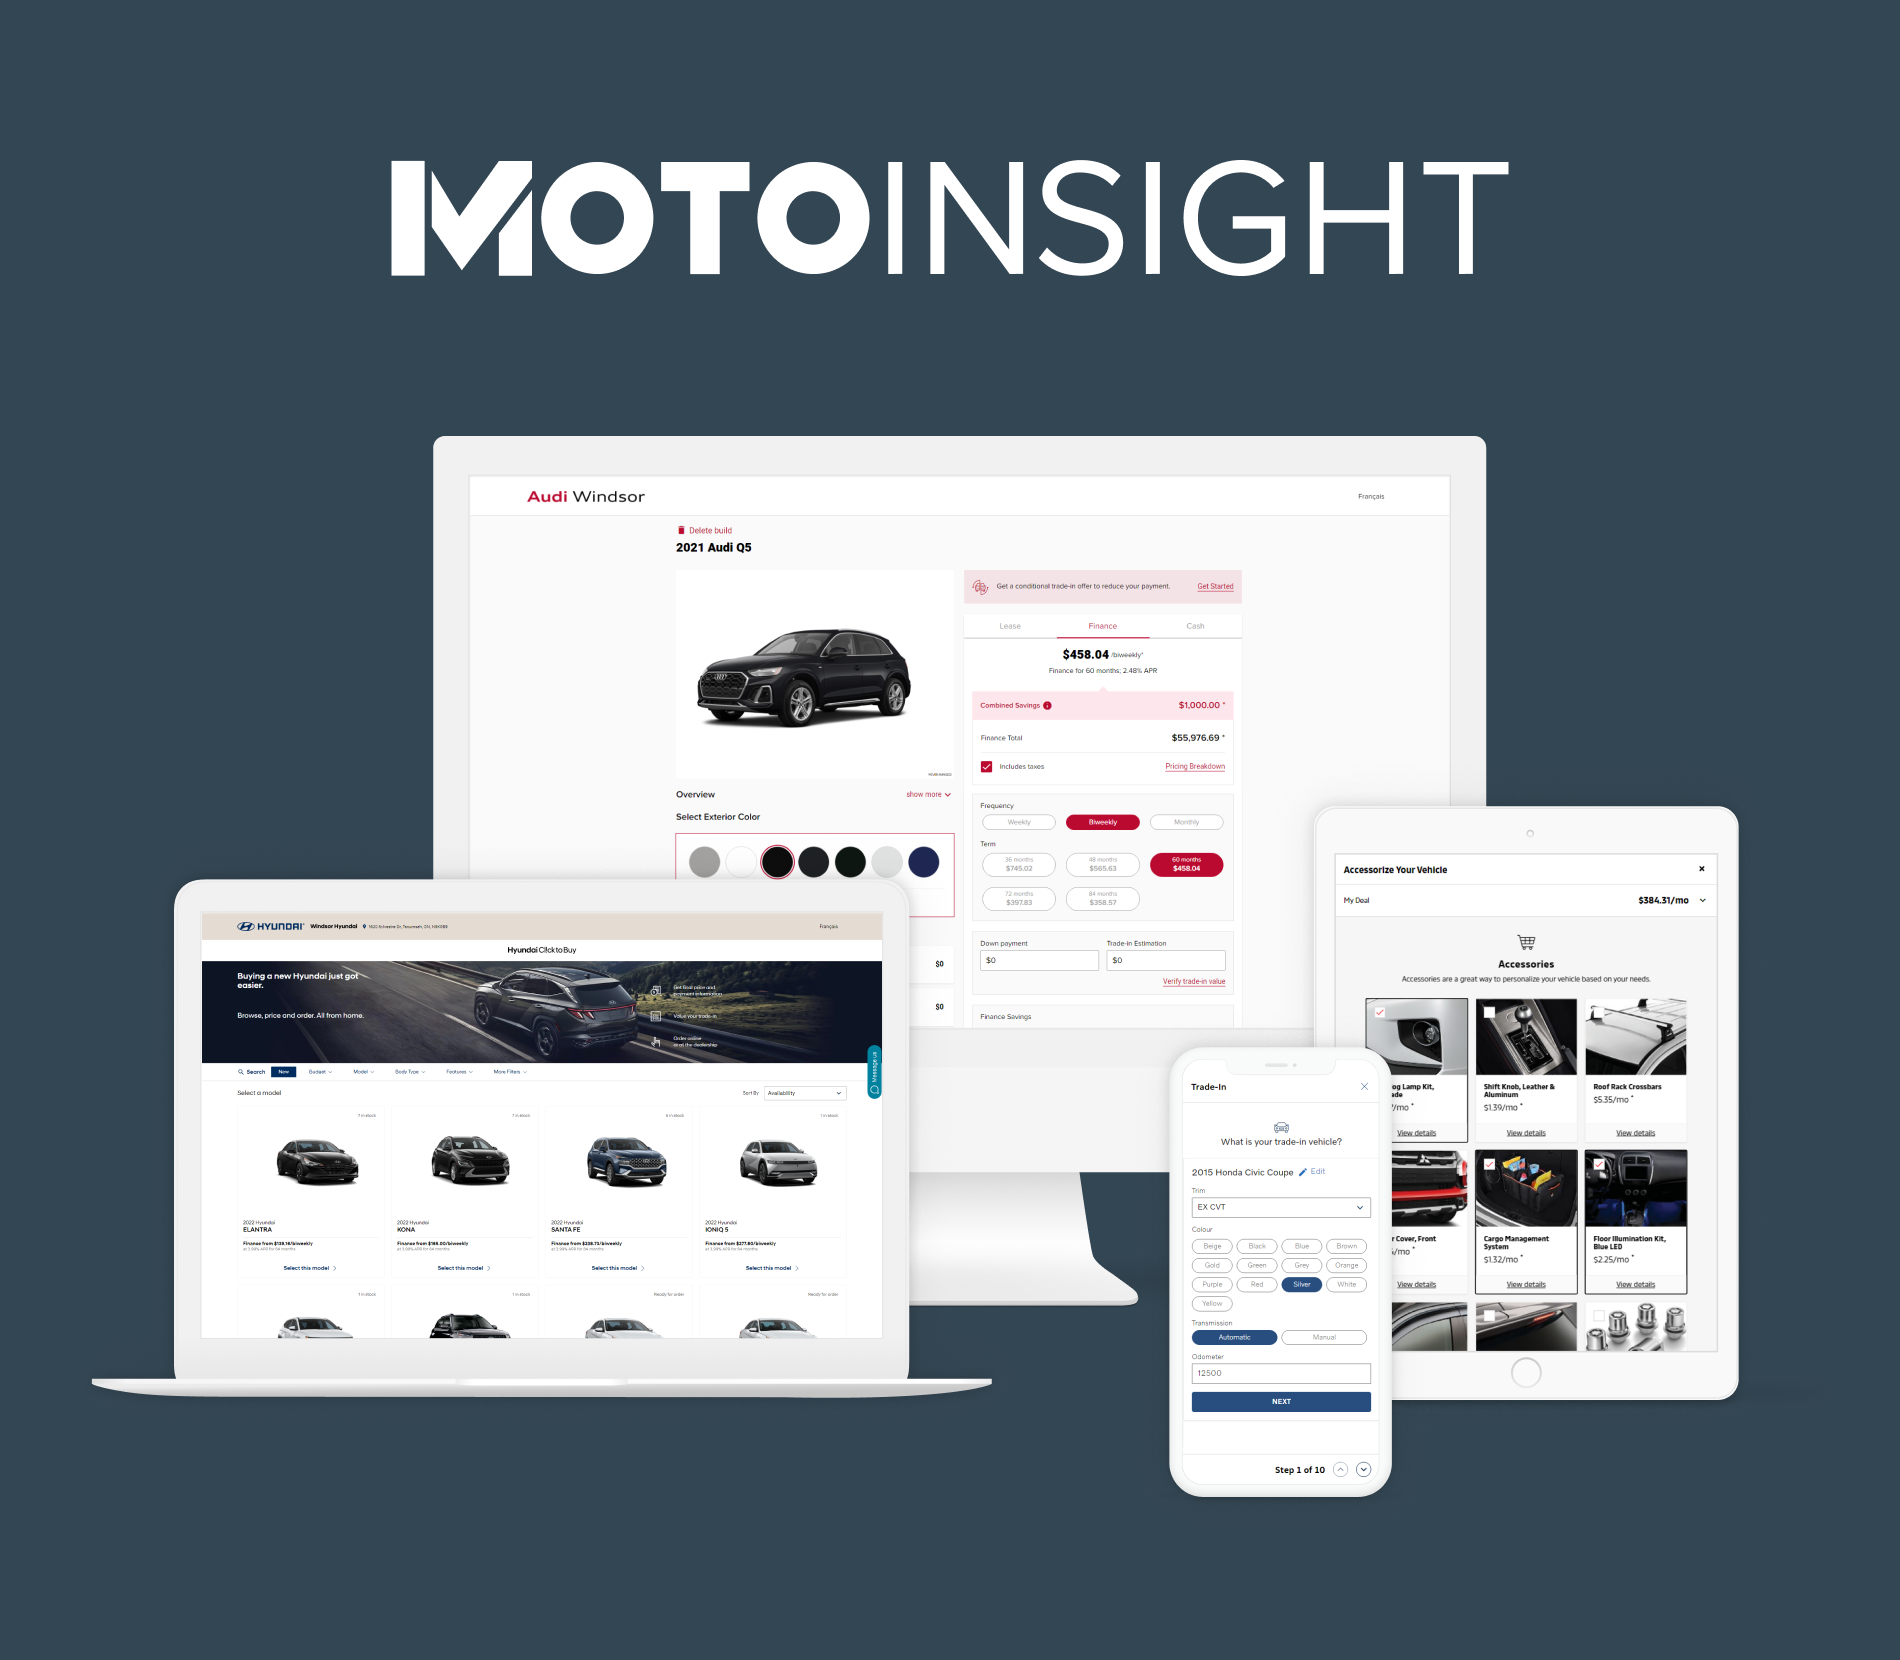 MotoCommerce screens from dealerships and OEMs